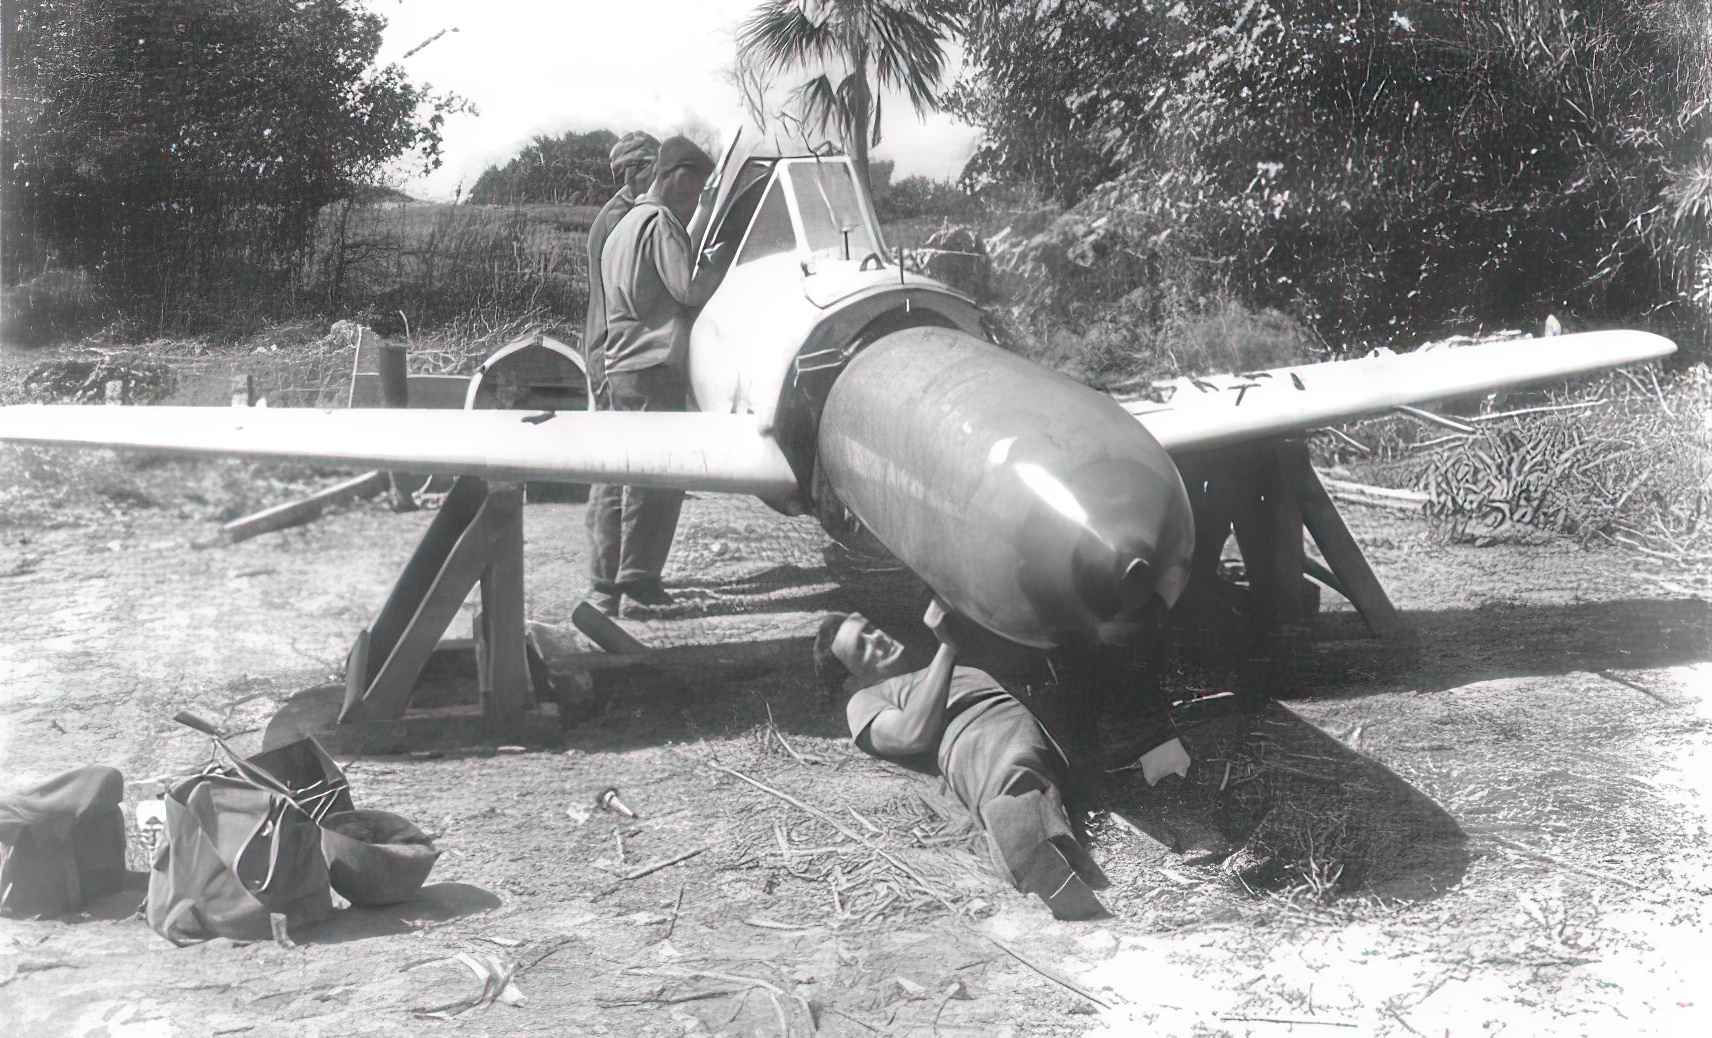 US personnel disarming the warhead of an Ohka WW2